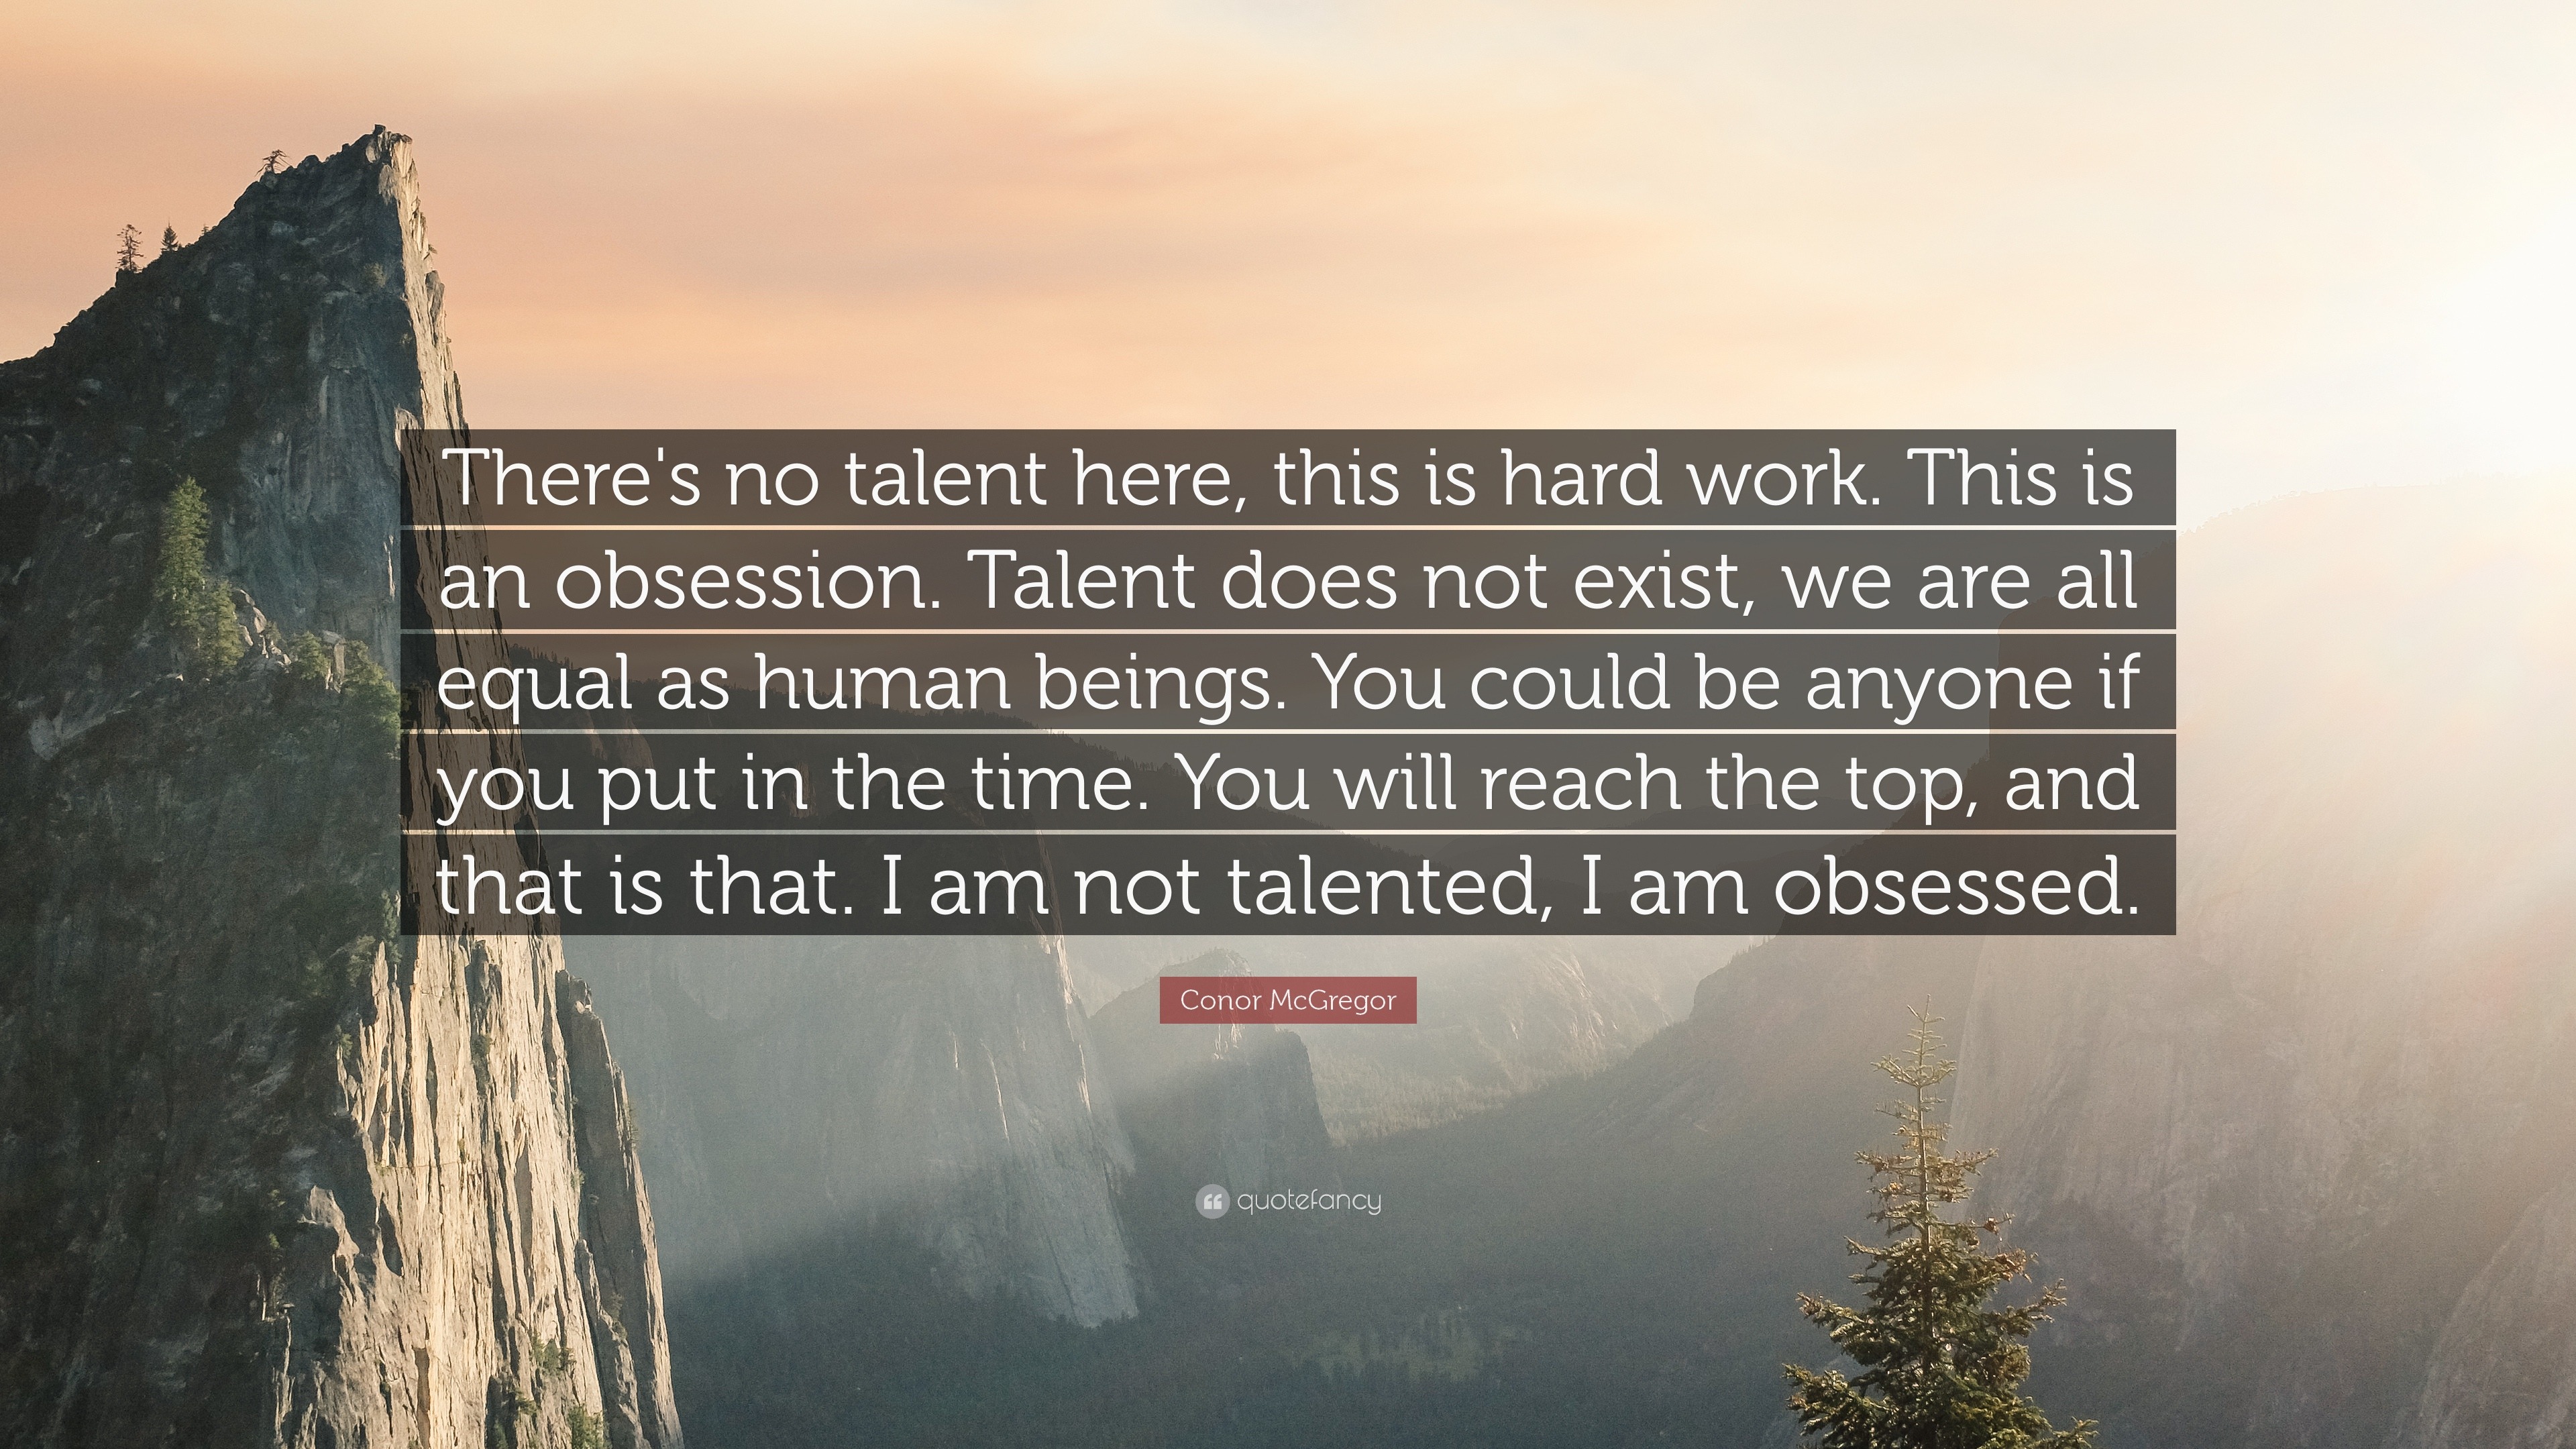 Conor McGregor Quote: “There's no talent here, this is hard work. This is  an obsession. Talent does not exist, we are all equal as human beings...”